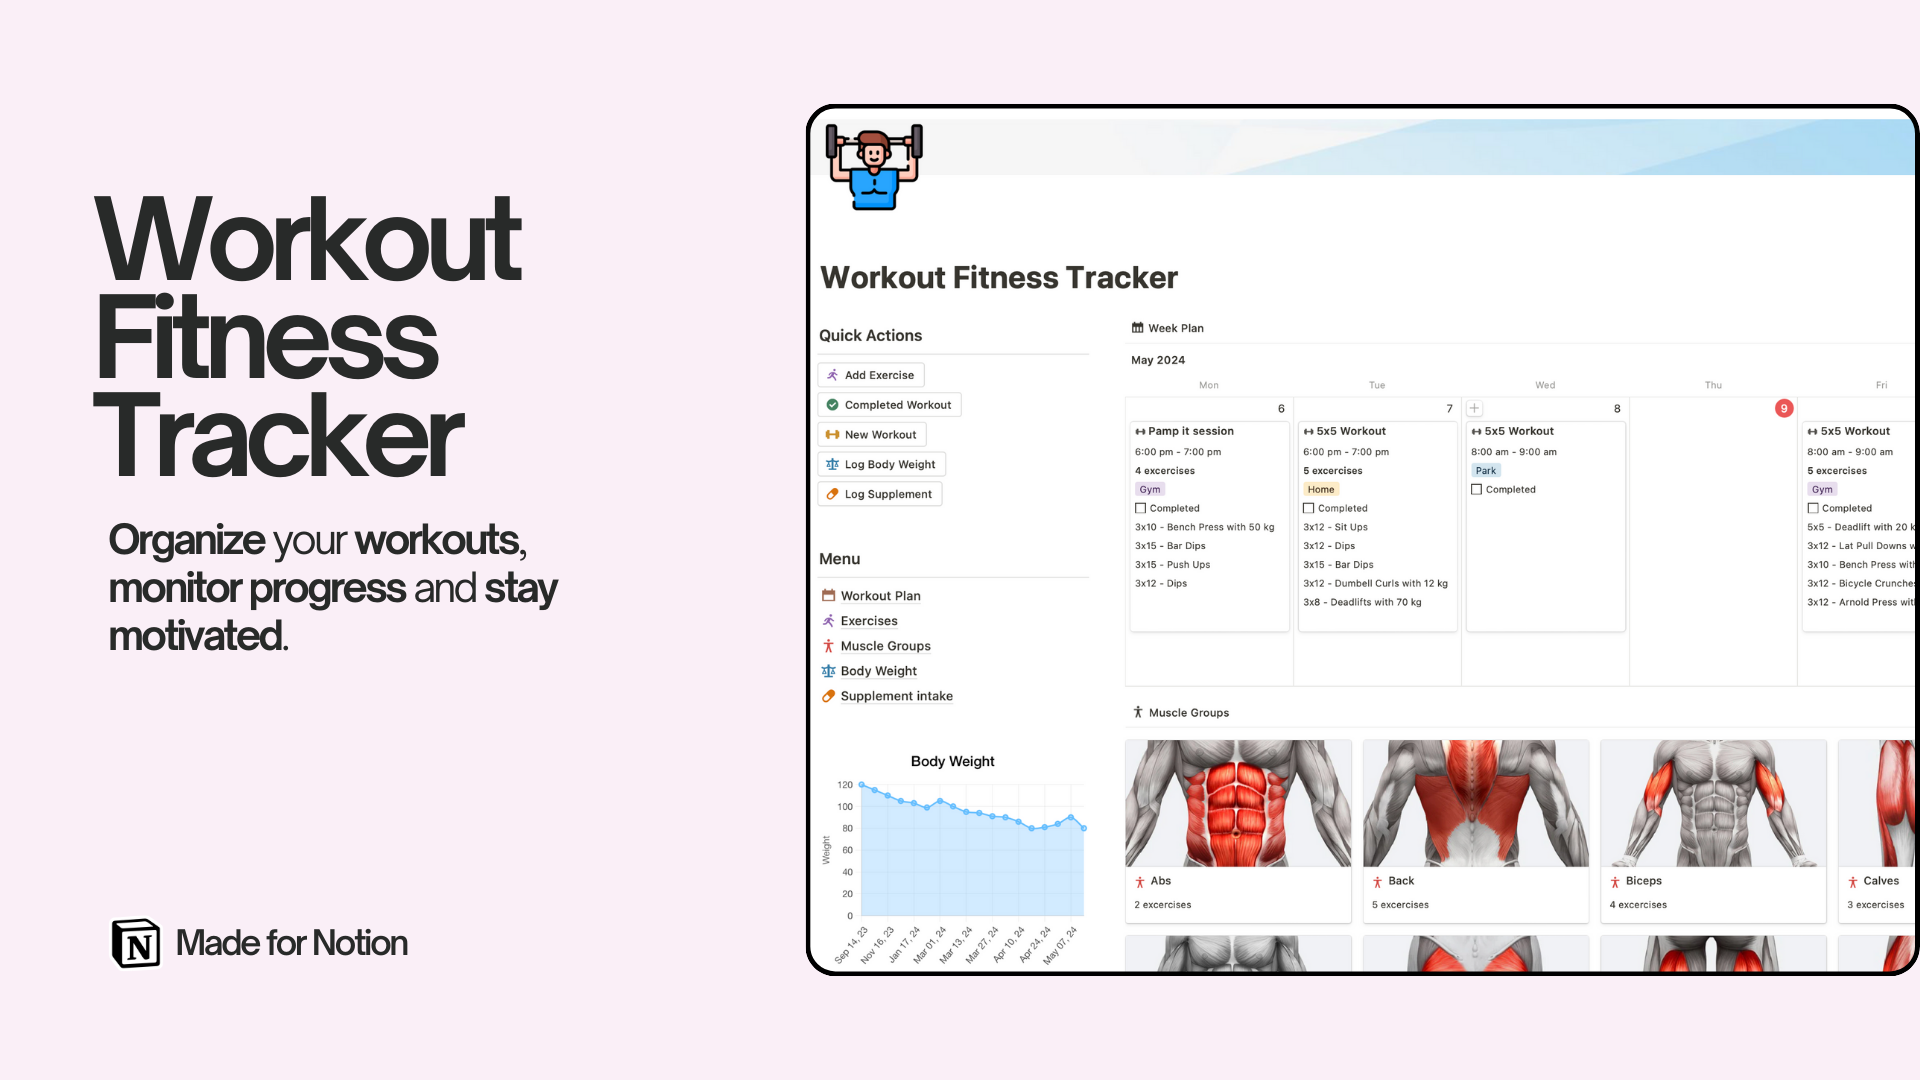 Effortlessly monitor your fitness plan with this intuitive workout tracker in Notion, designed to streamline your progress. From sets and reps to overall performance, stay motivated and organized as you crush your fitness goals with ease!